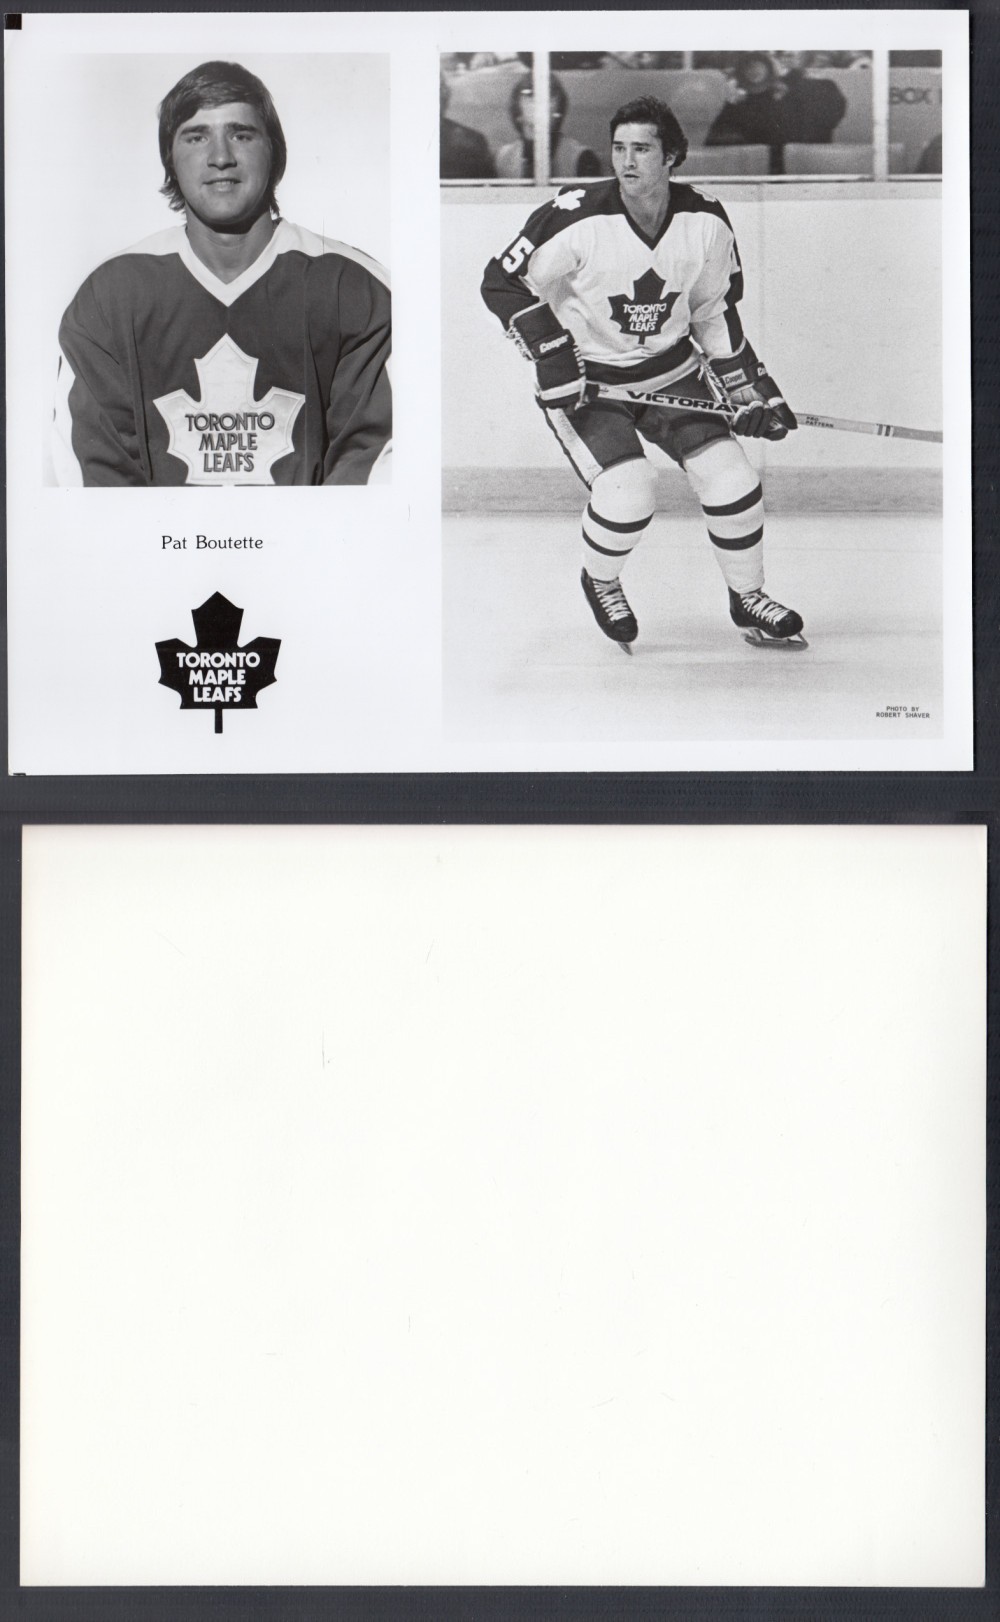 EARLY 1980'S TORONTO MAPLE LEAFS MEDIA PHOTO P. BOUTETTE photo